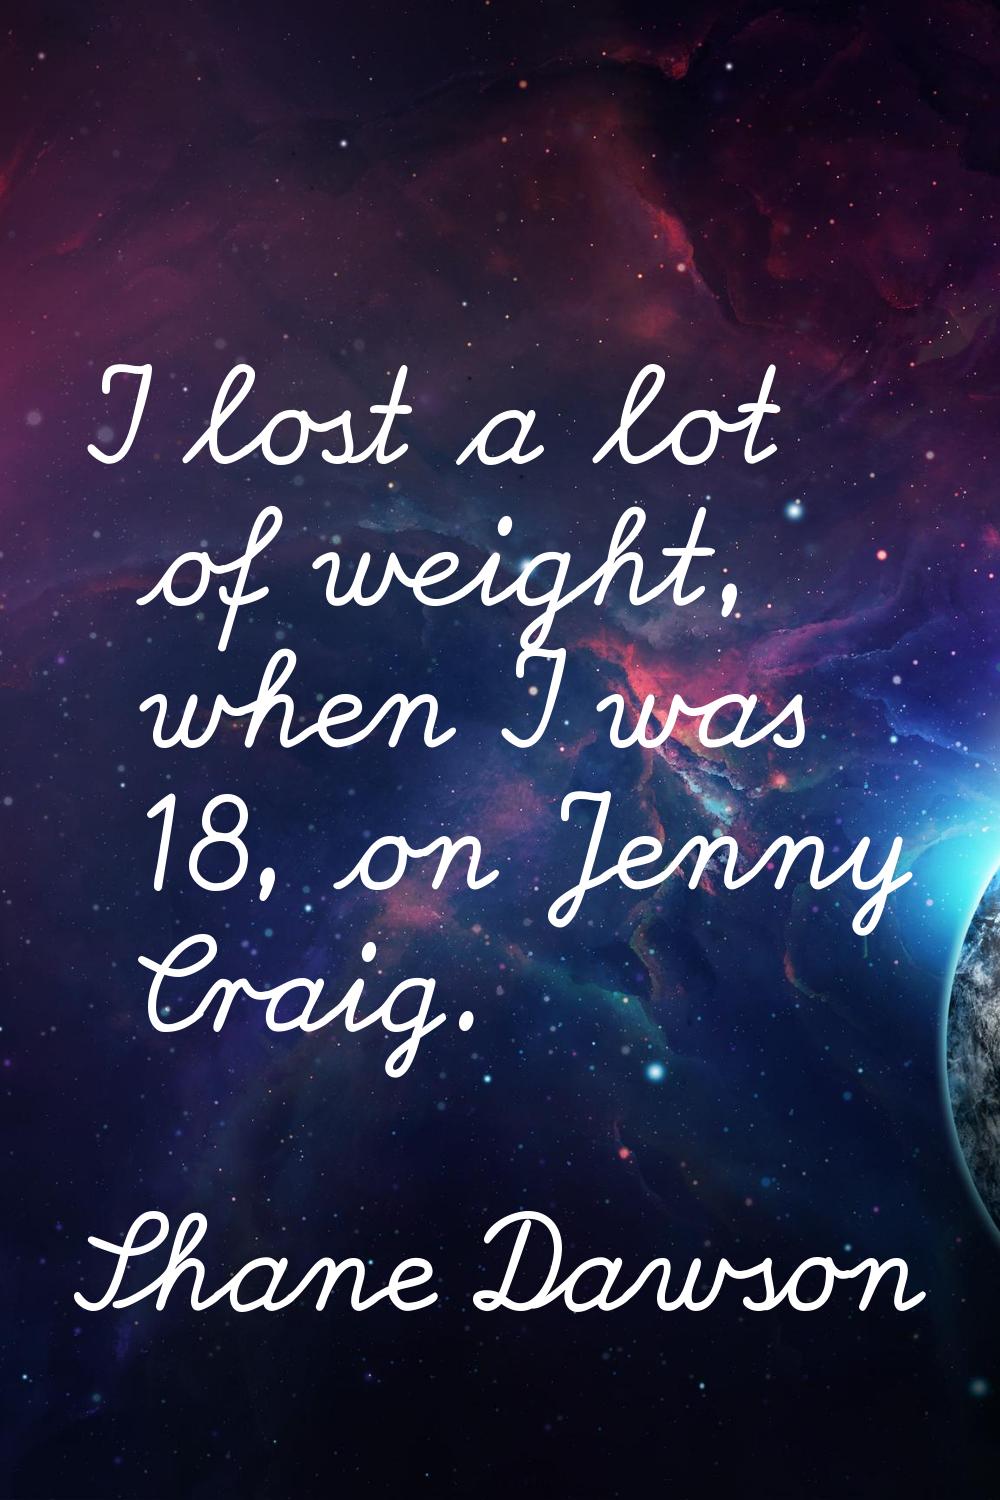 I lost a lot of weight, when I was 18, on Jenny Craig.